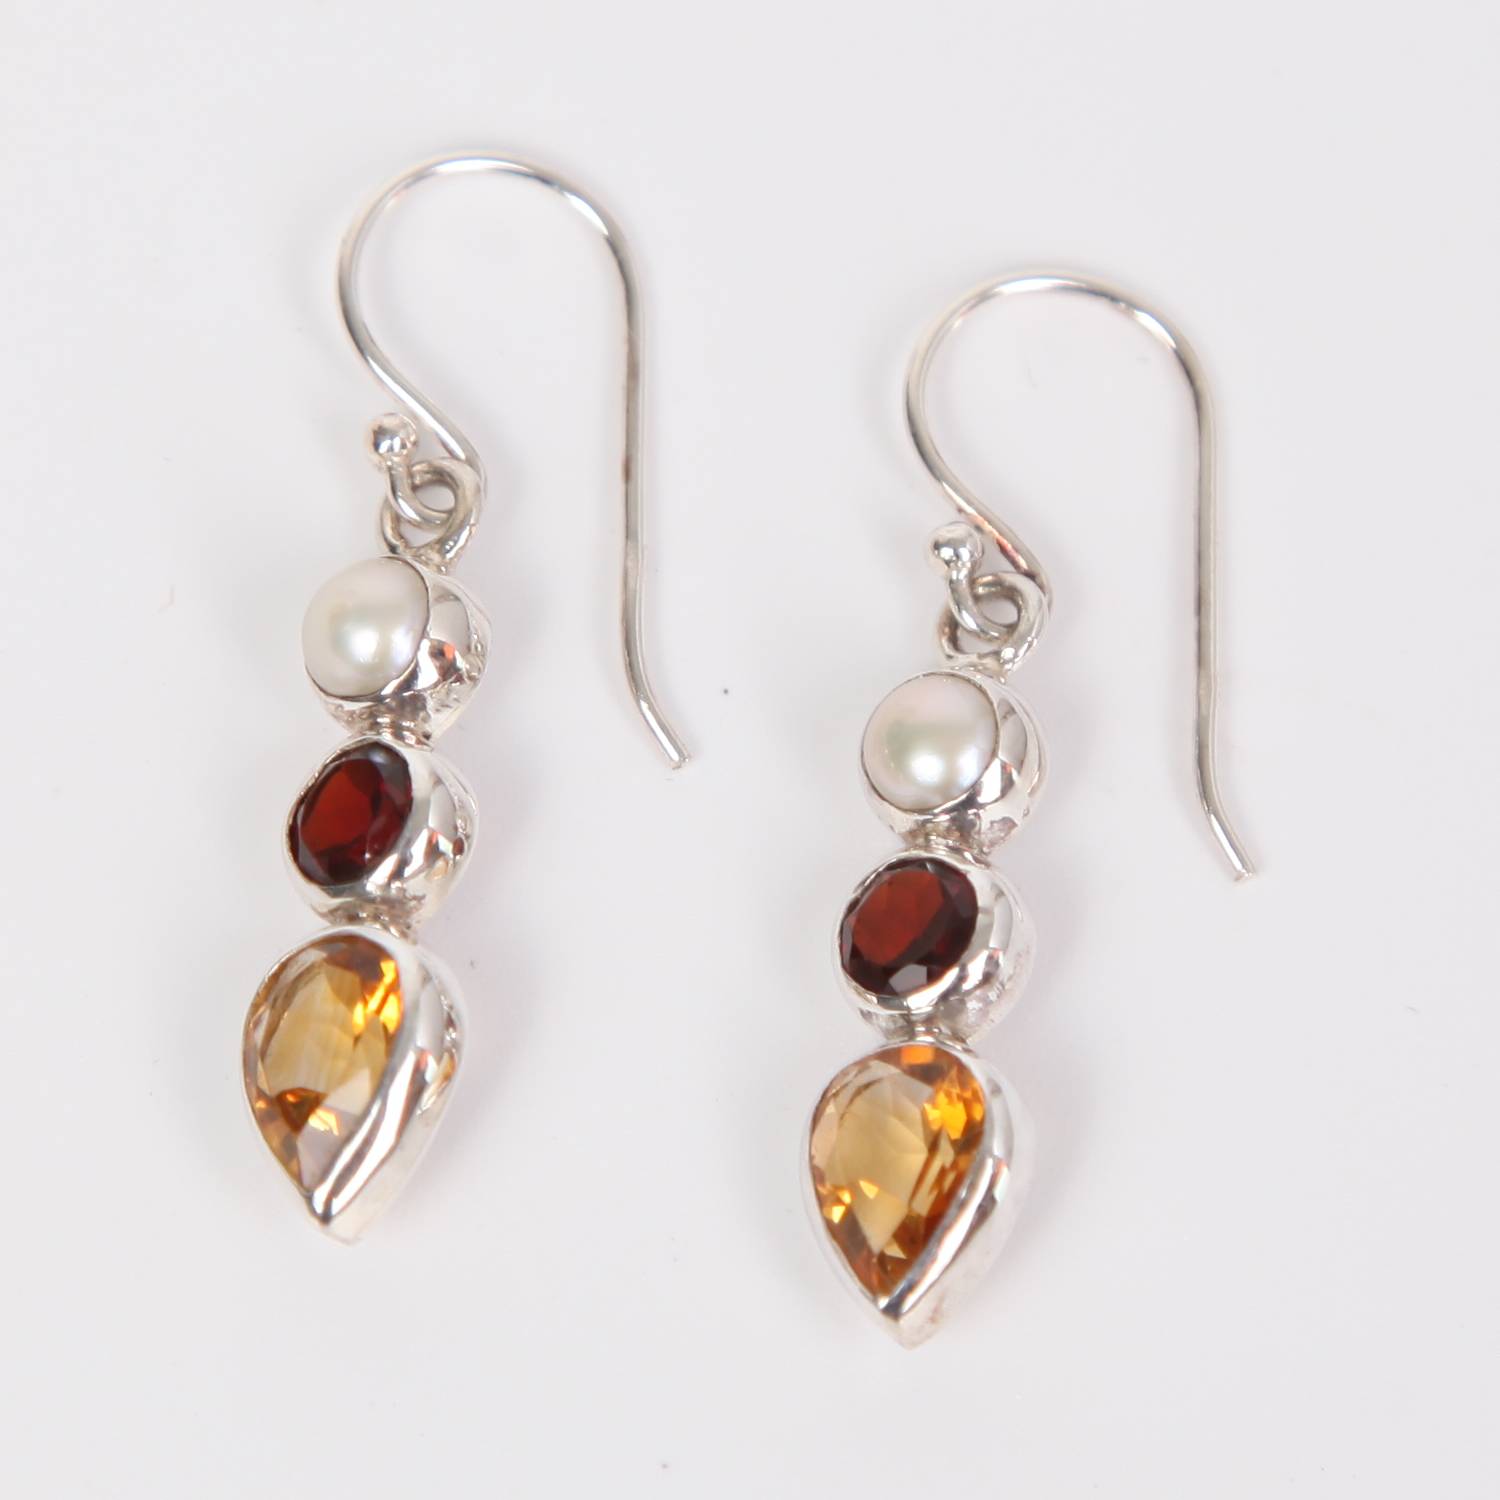 Citrine Sterling Silver Earrings with Garnet and Fresh Water Pearl